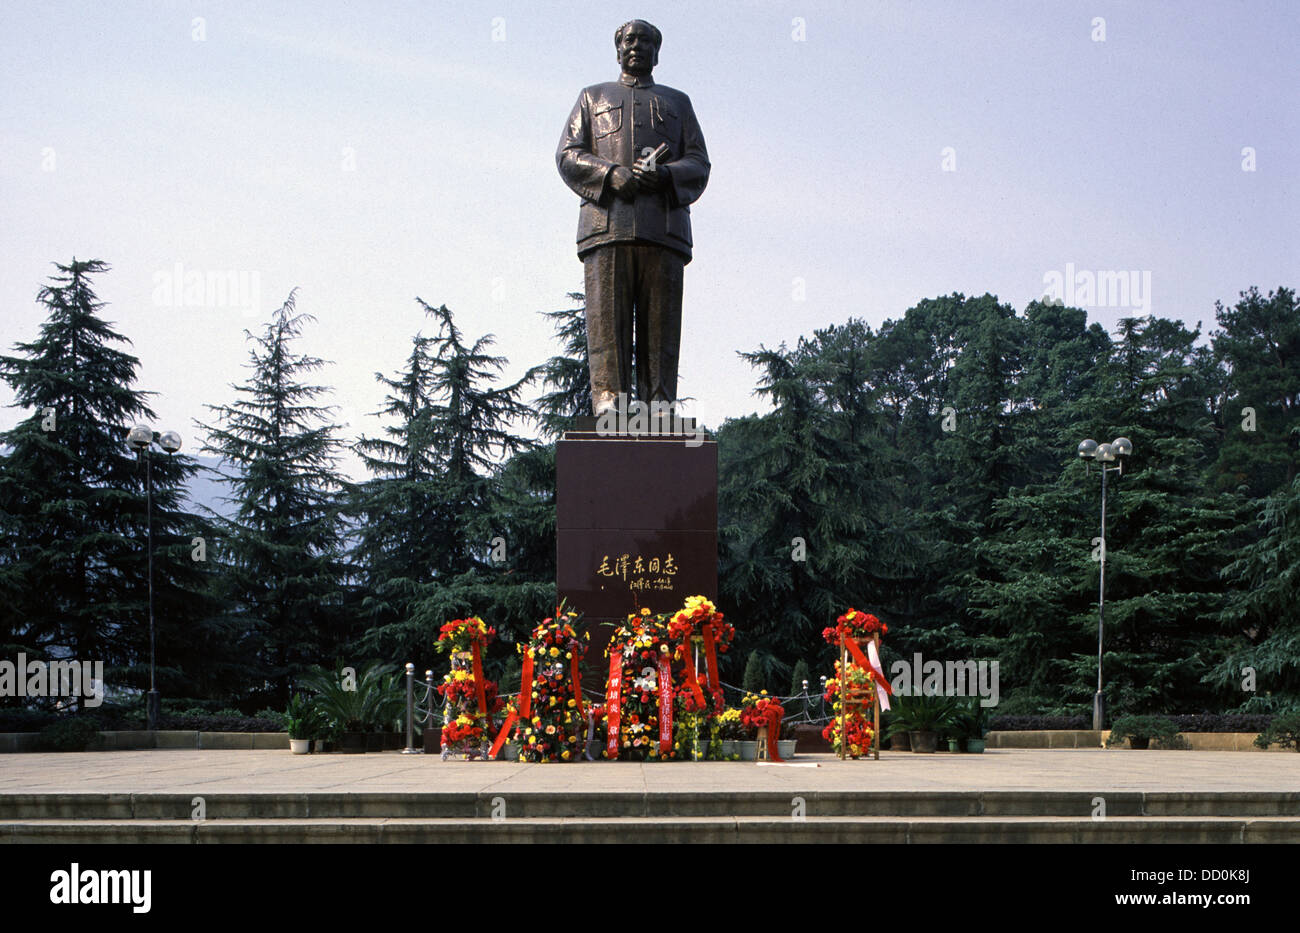 Mao Zedong monument in the town of Shaoshan in which Mao Zedong or Mao Tse-tung also known as Chairman Mao was born and spent his childhood located on the mid-eastern Hunan and the mid-north of Xiangtan in China Stock Photo